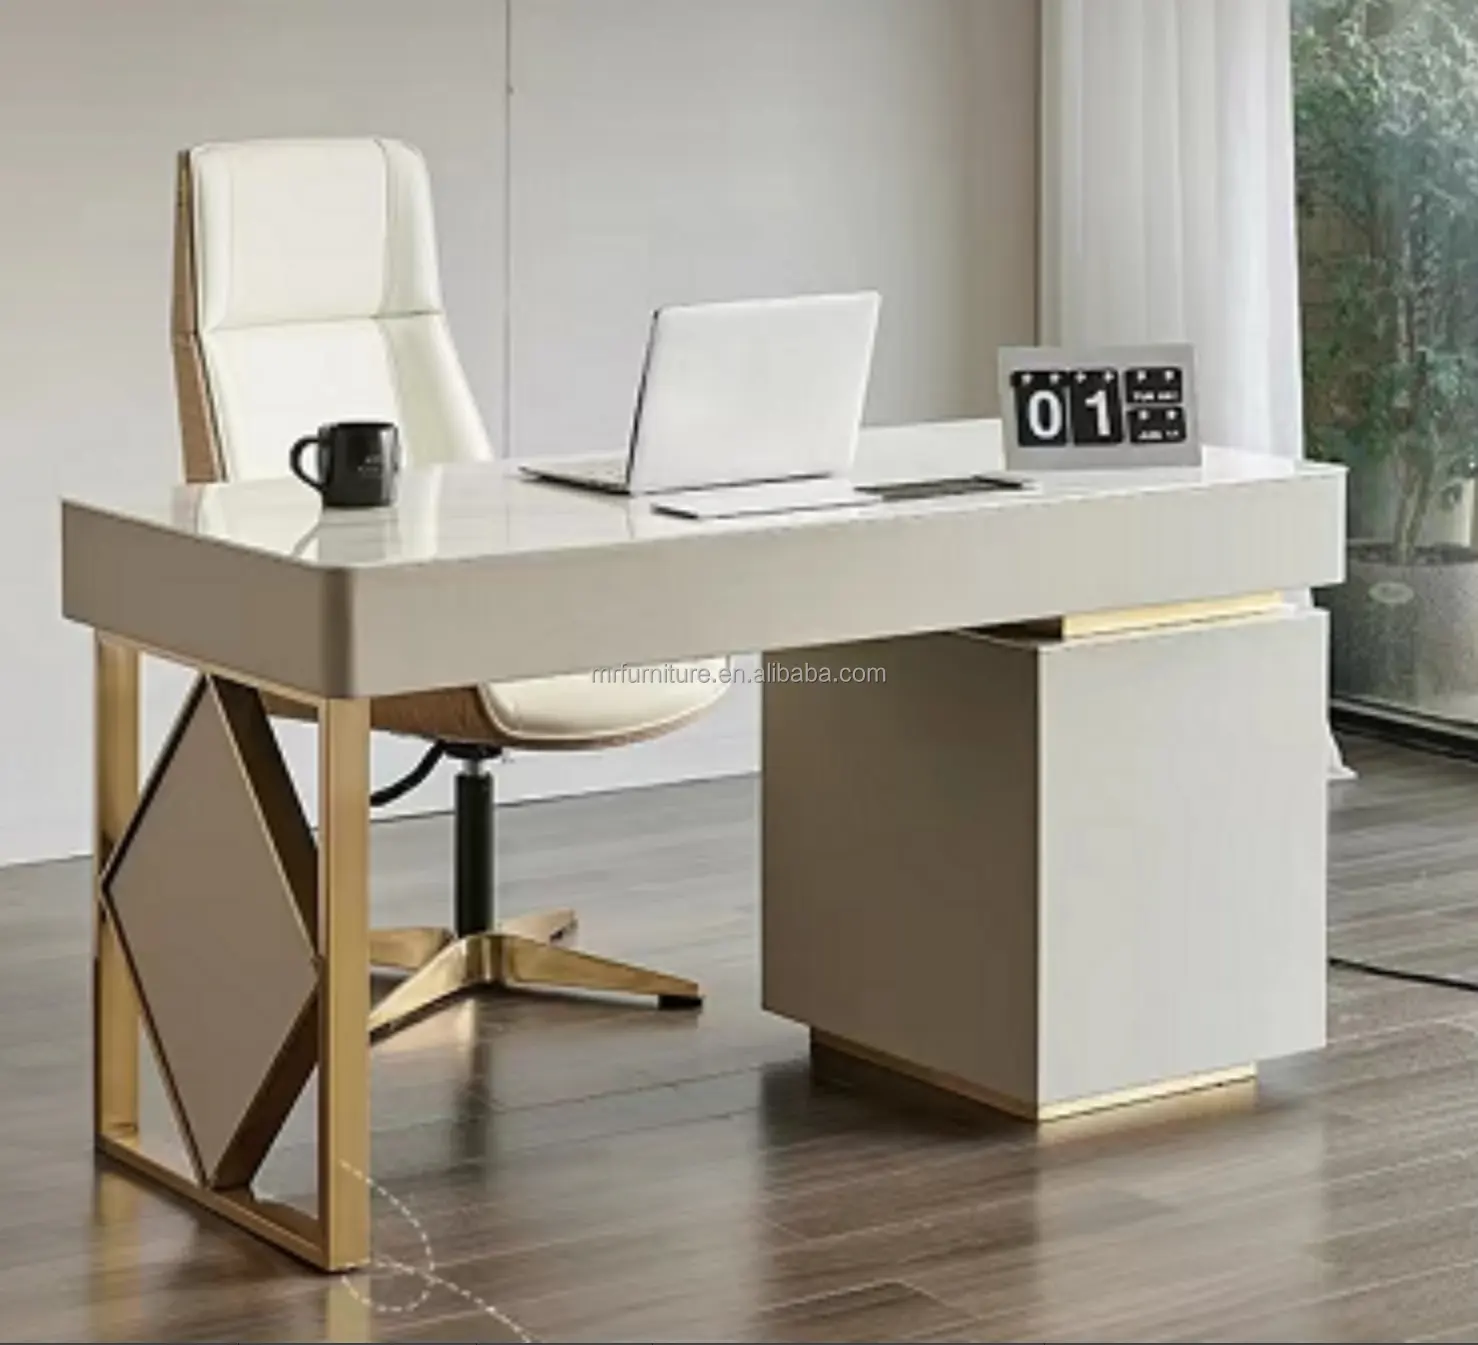 Modern Office Furniture Luxury Golden Stainless Steel Large Desk Office Table For Home Commercial